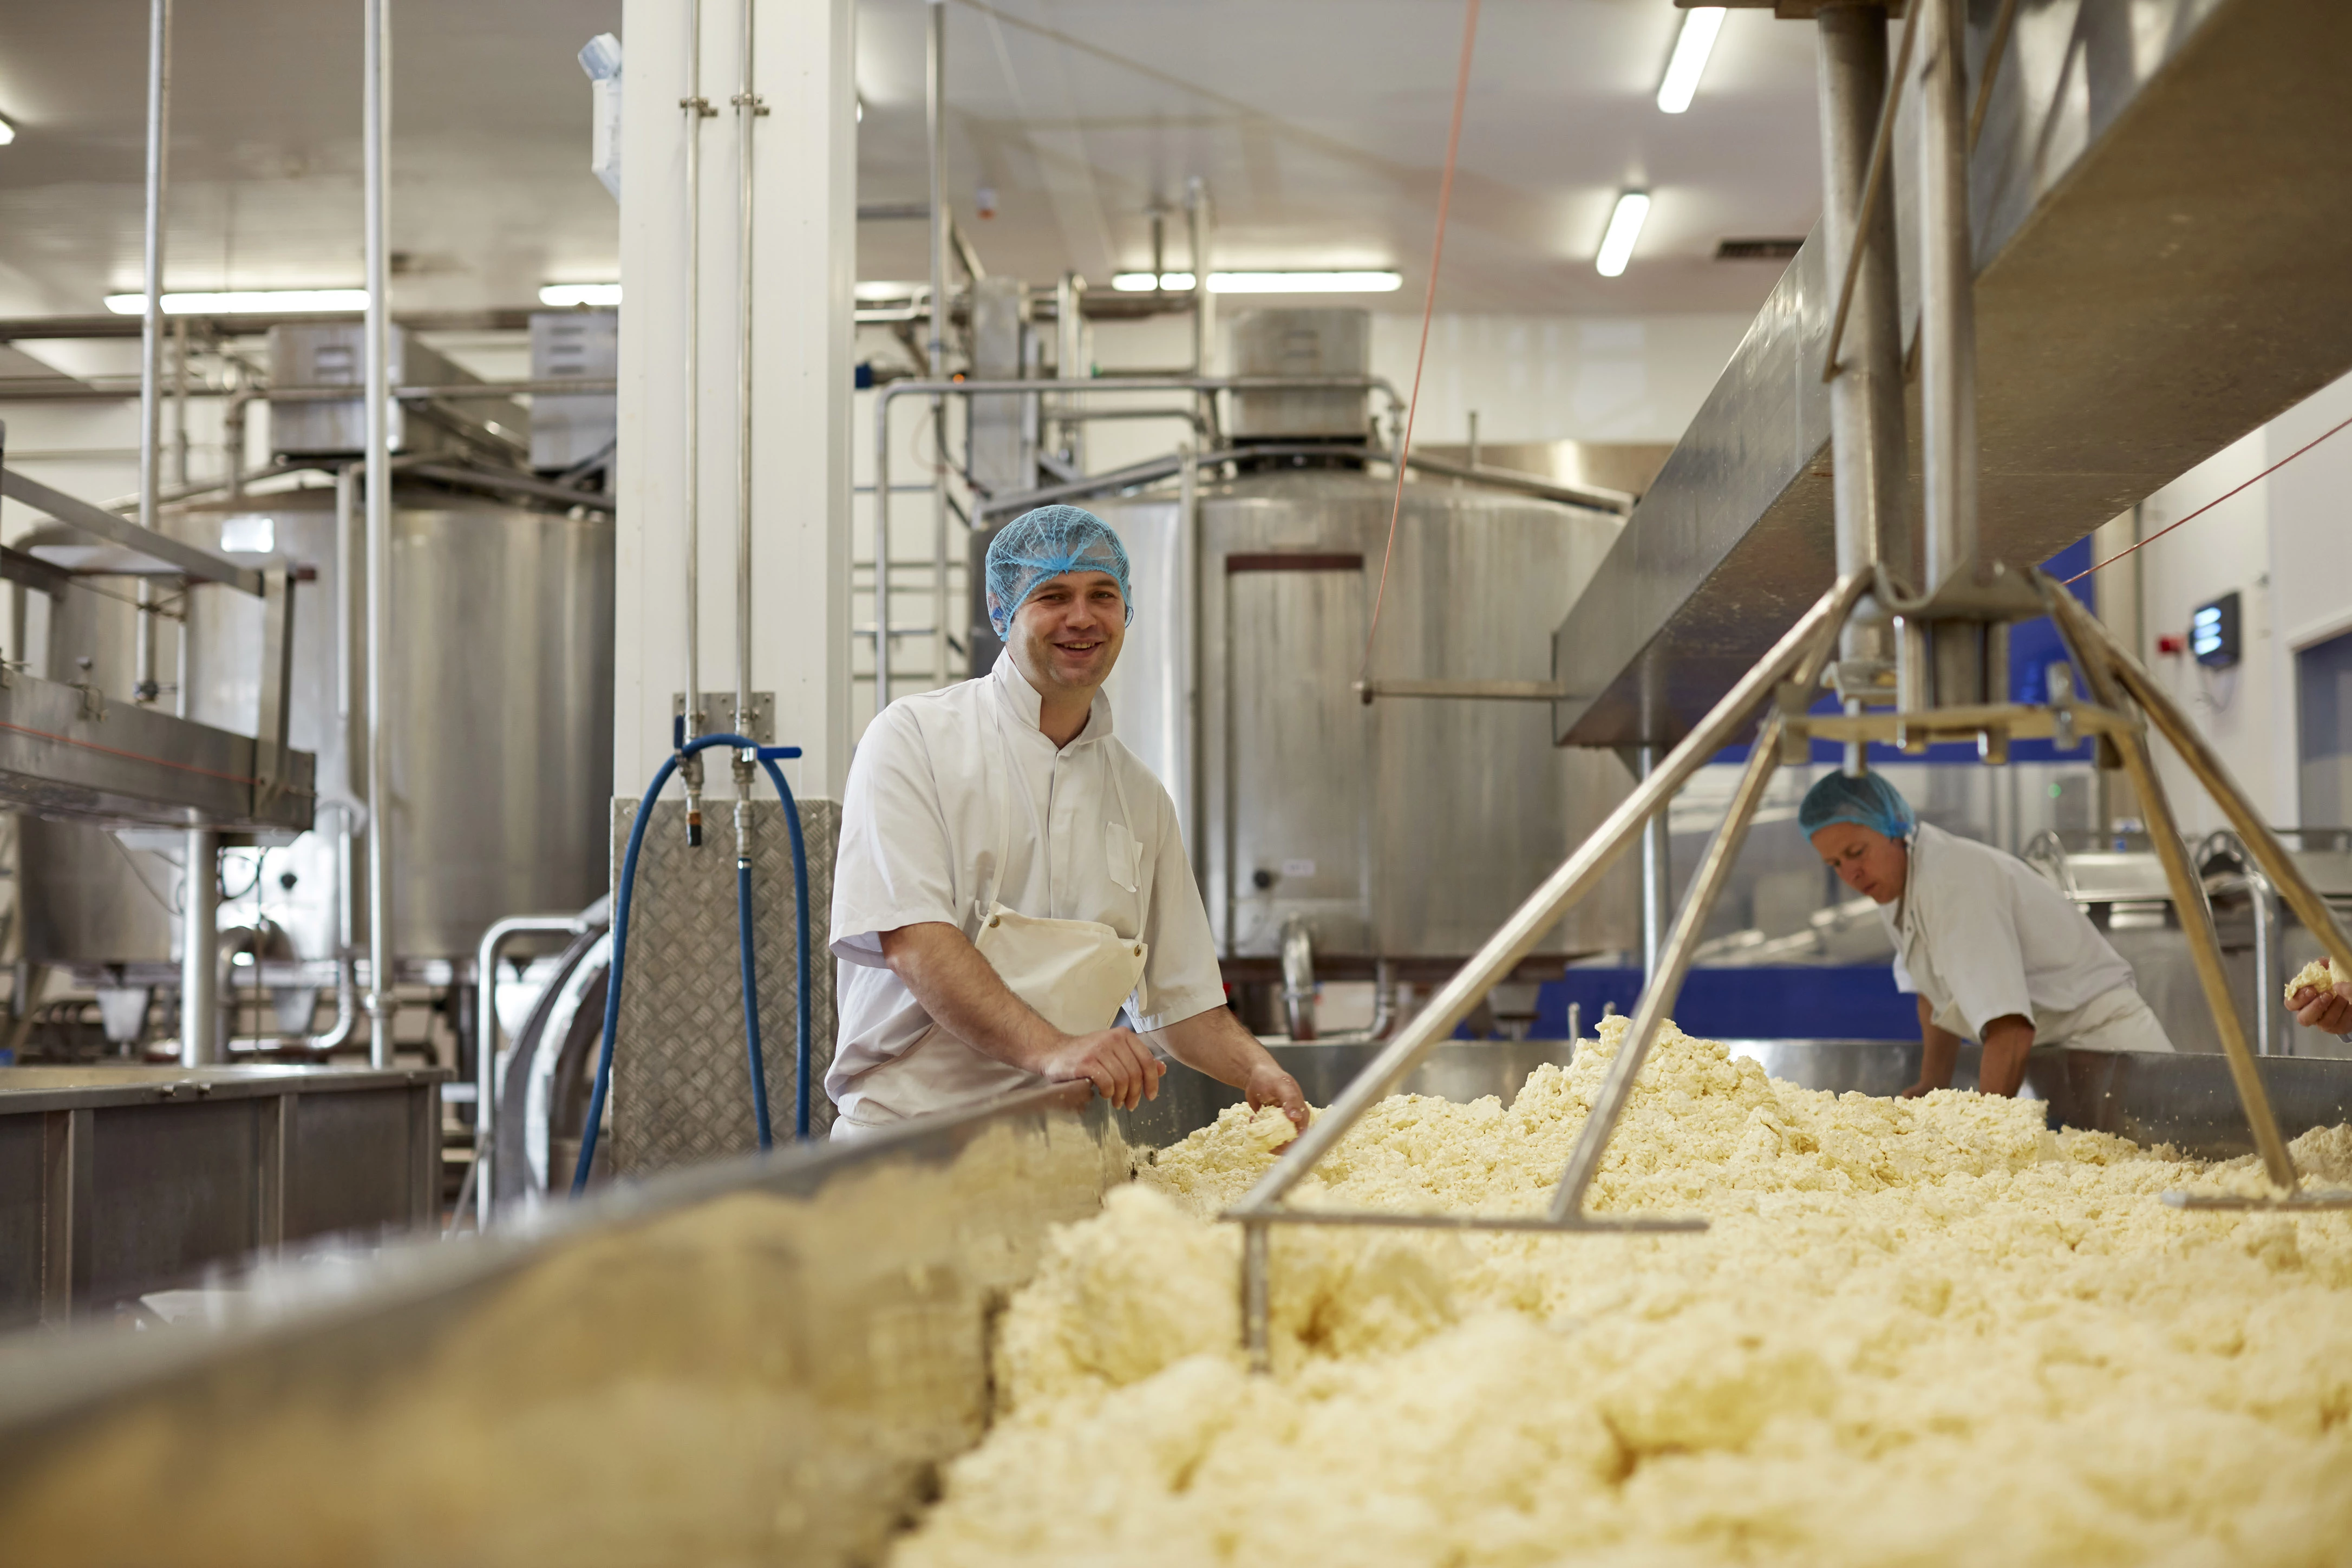 Wensleydale Creamery is investing in new equipment following £17.9m funding from HSBC UK